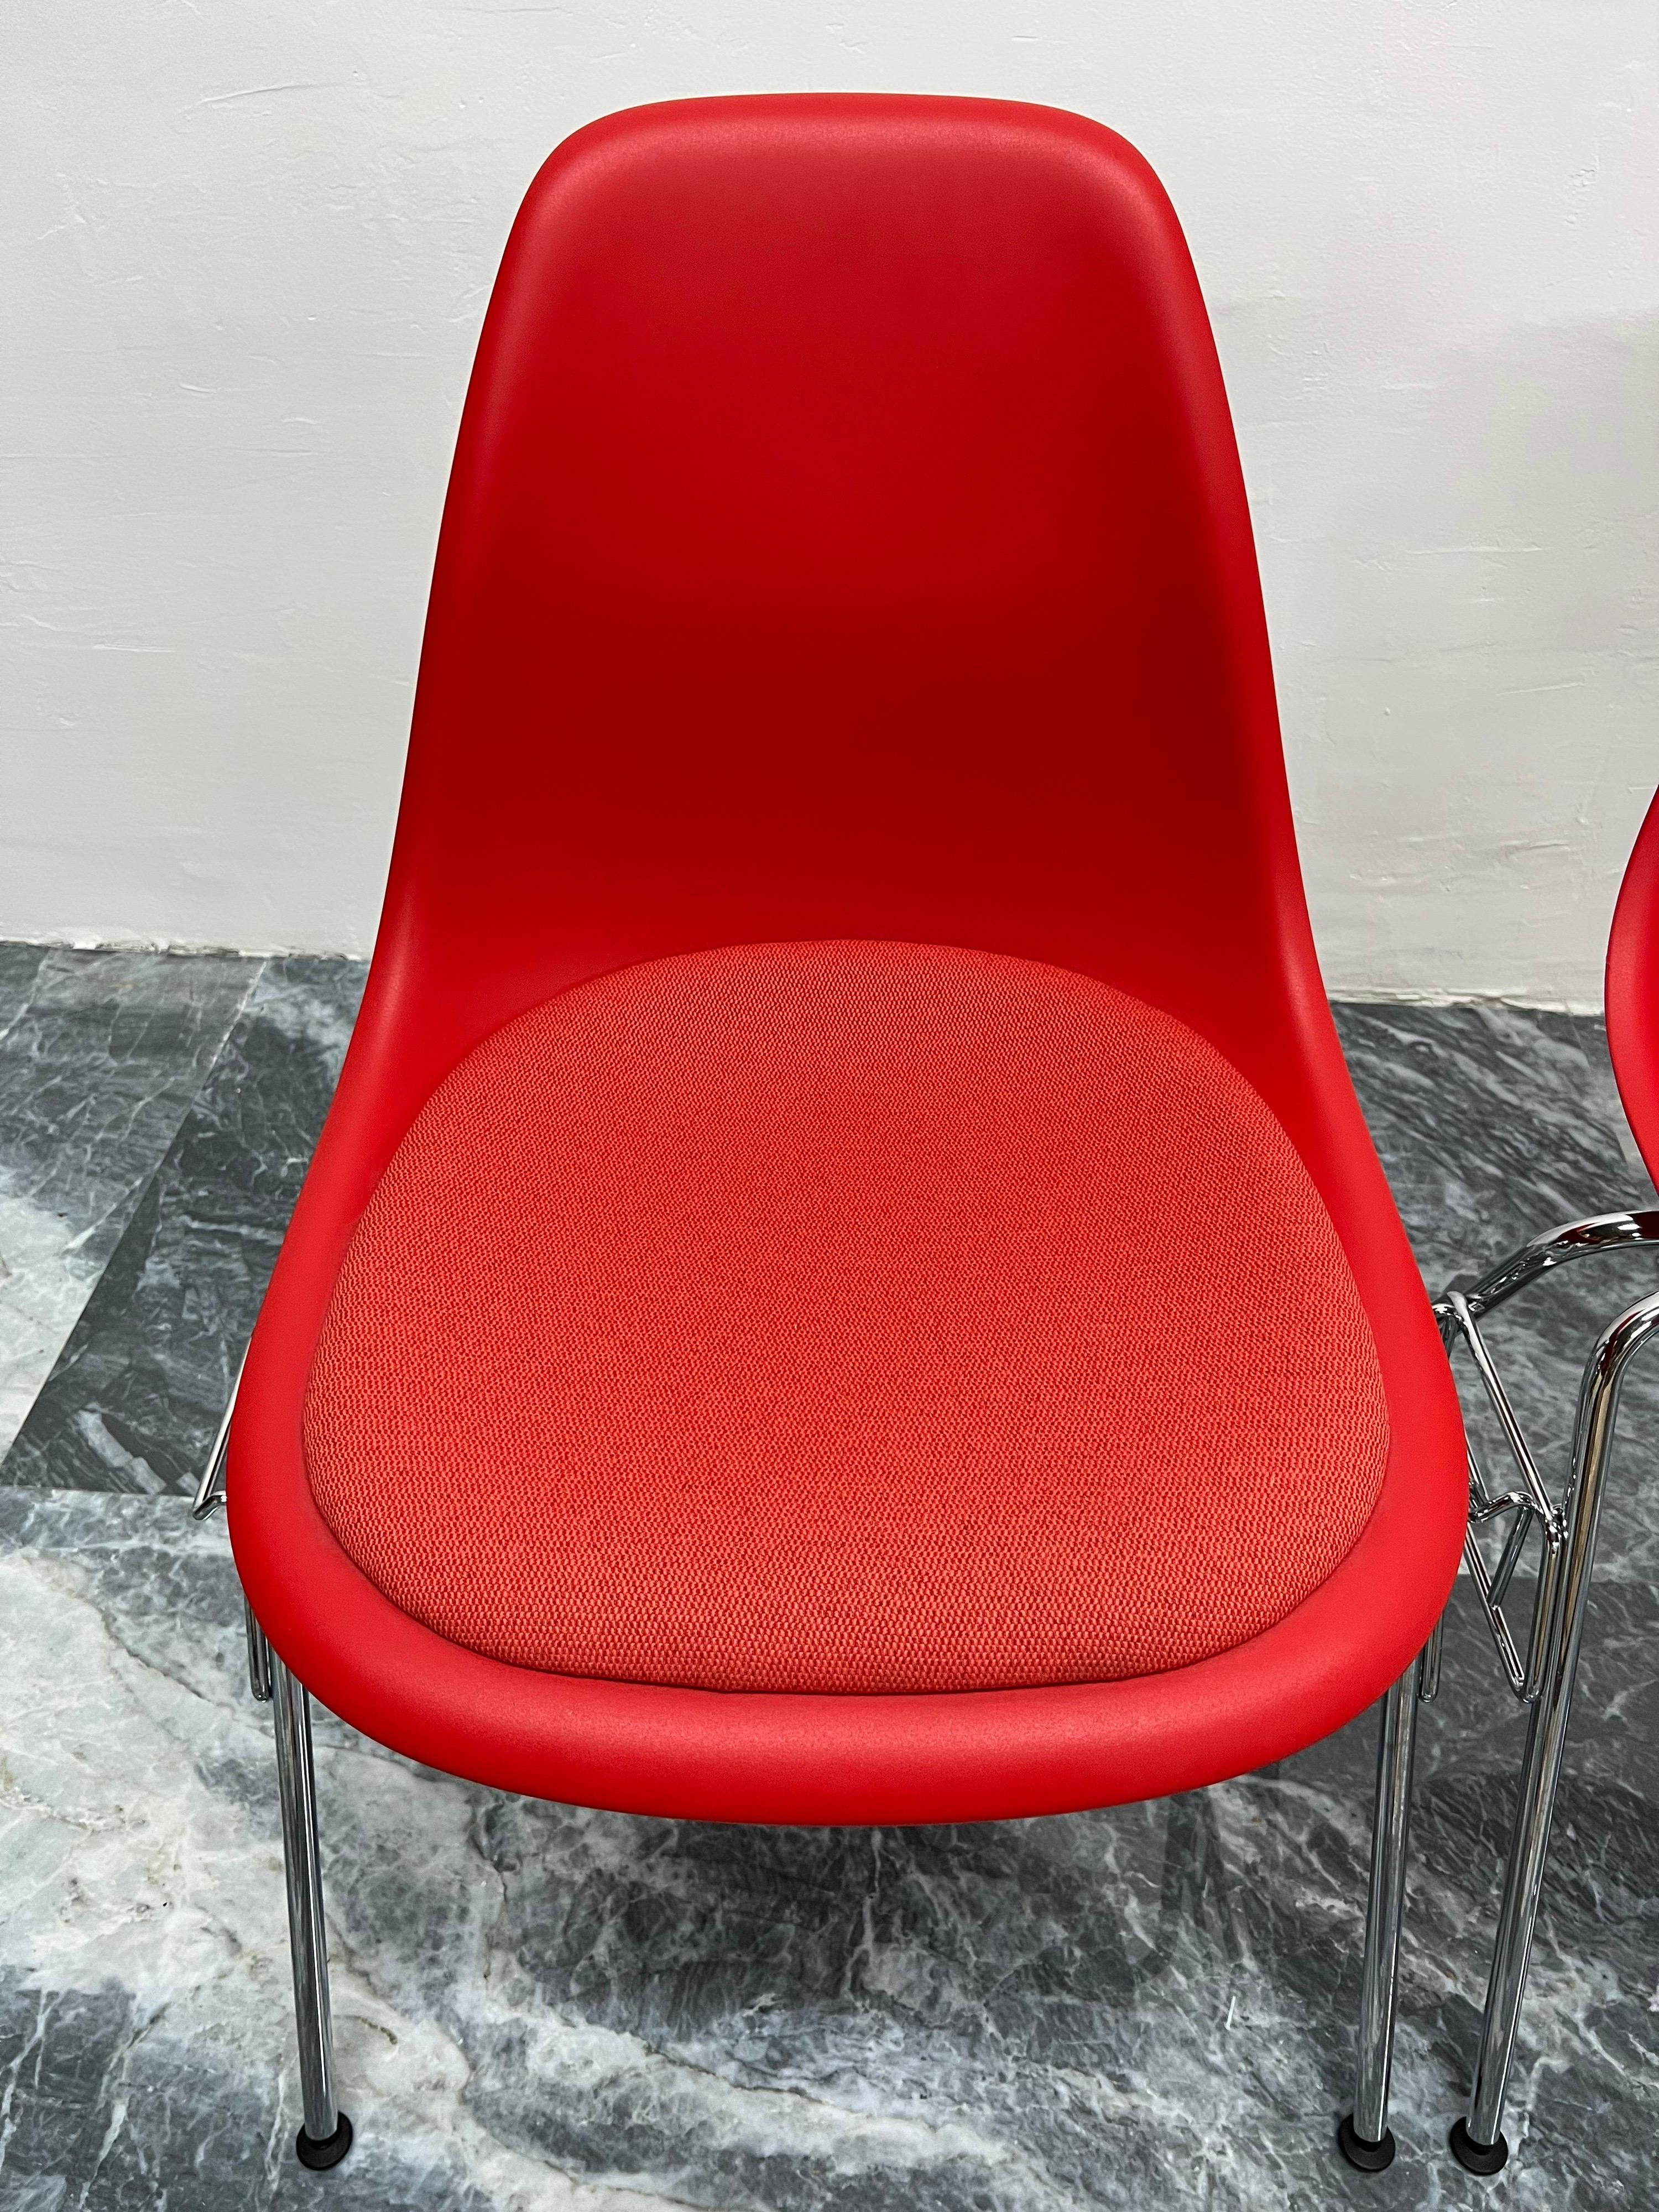 Contemporary Eames Molded Plastic Chairs with Upholstered Seats for Herman Miller, a Pair